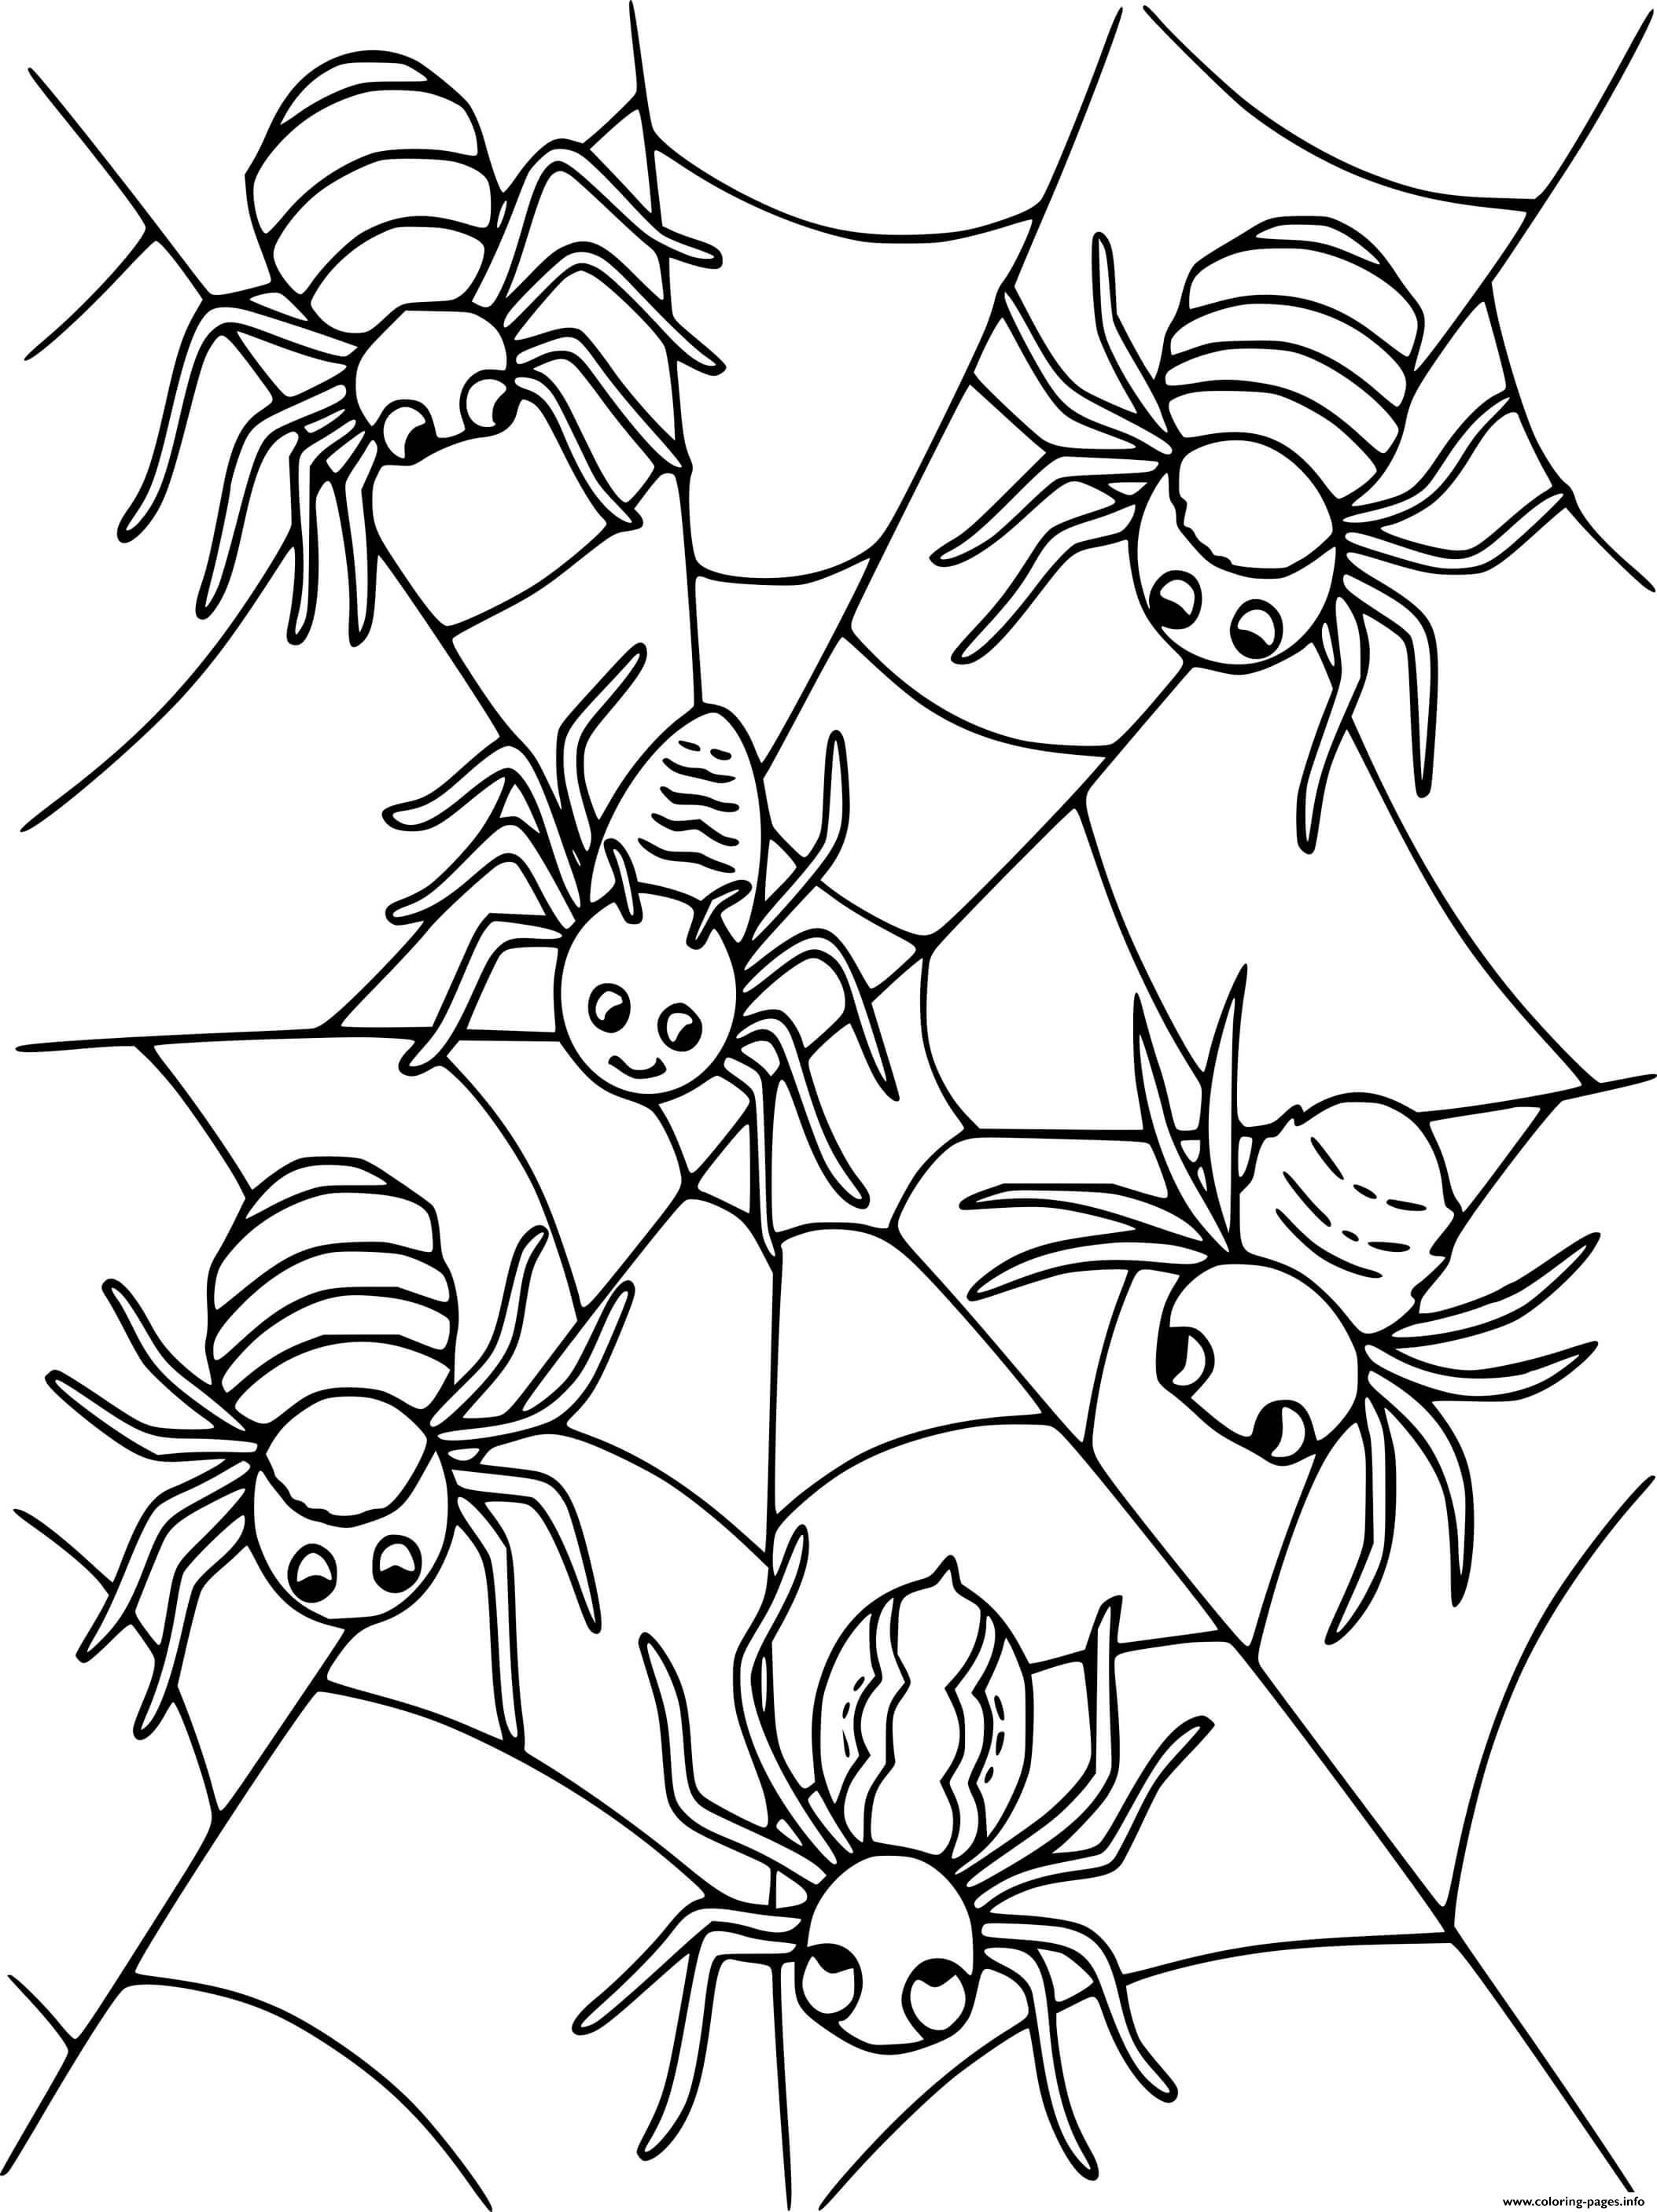 Six Spiders On The Web coloring